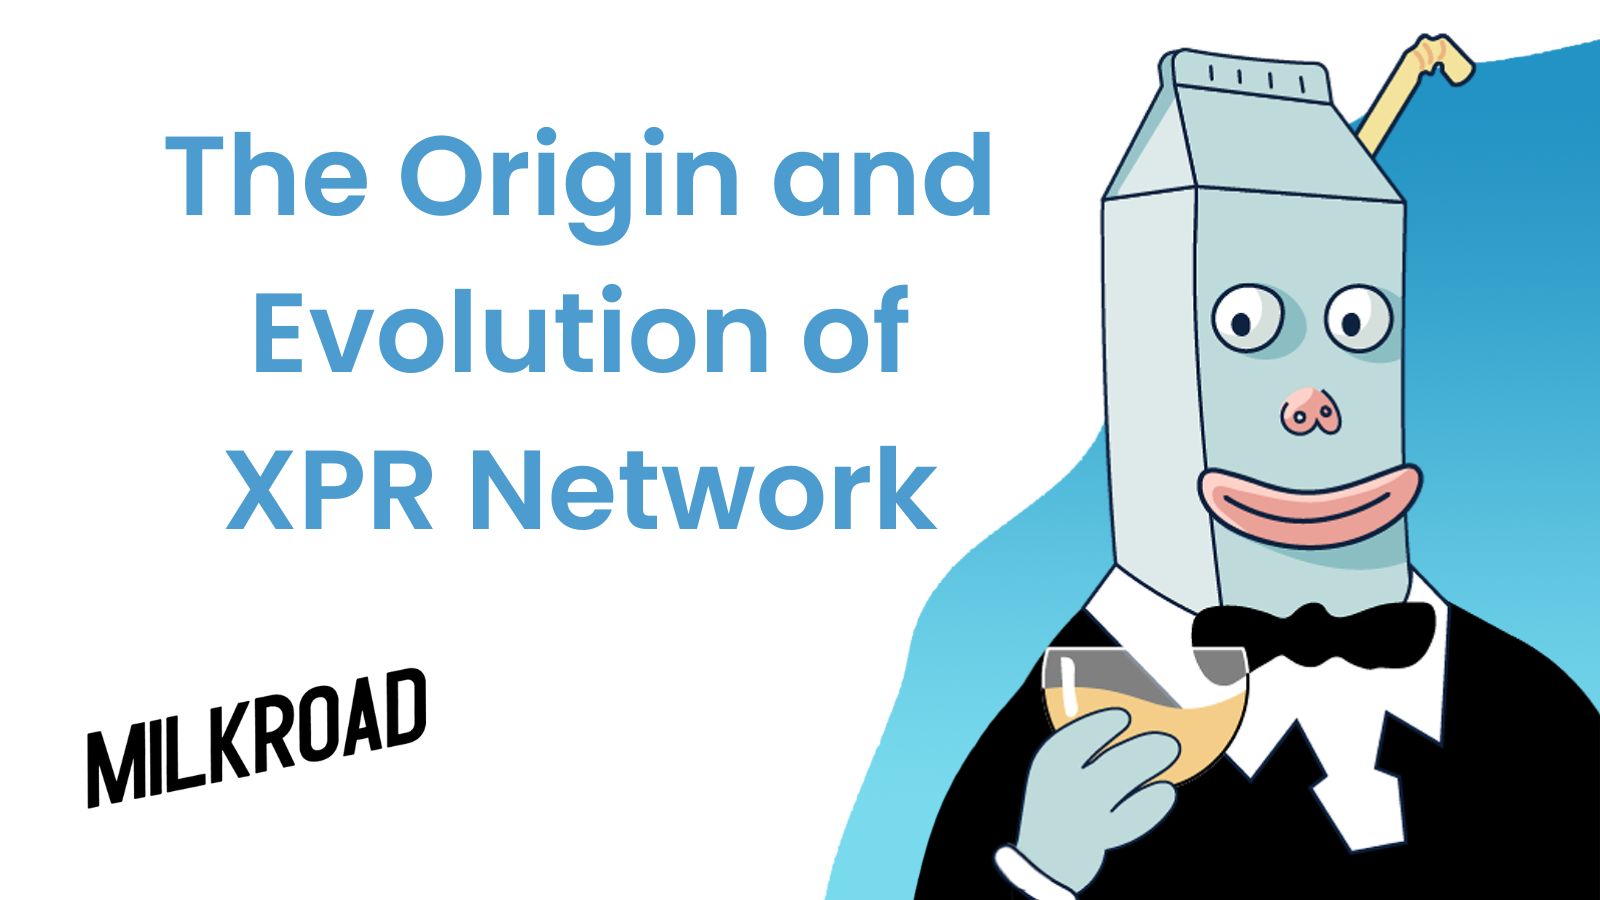 The Origin and Evolution of XPR Network